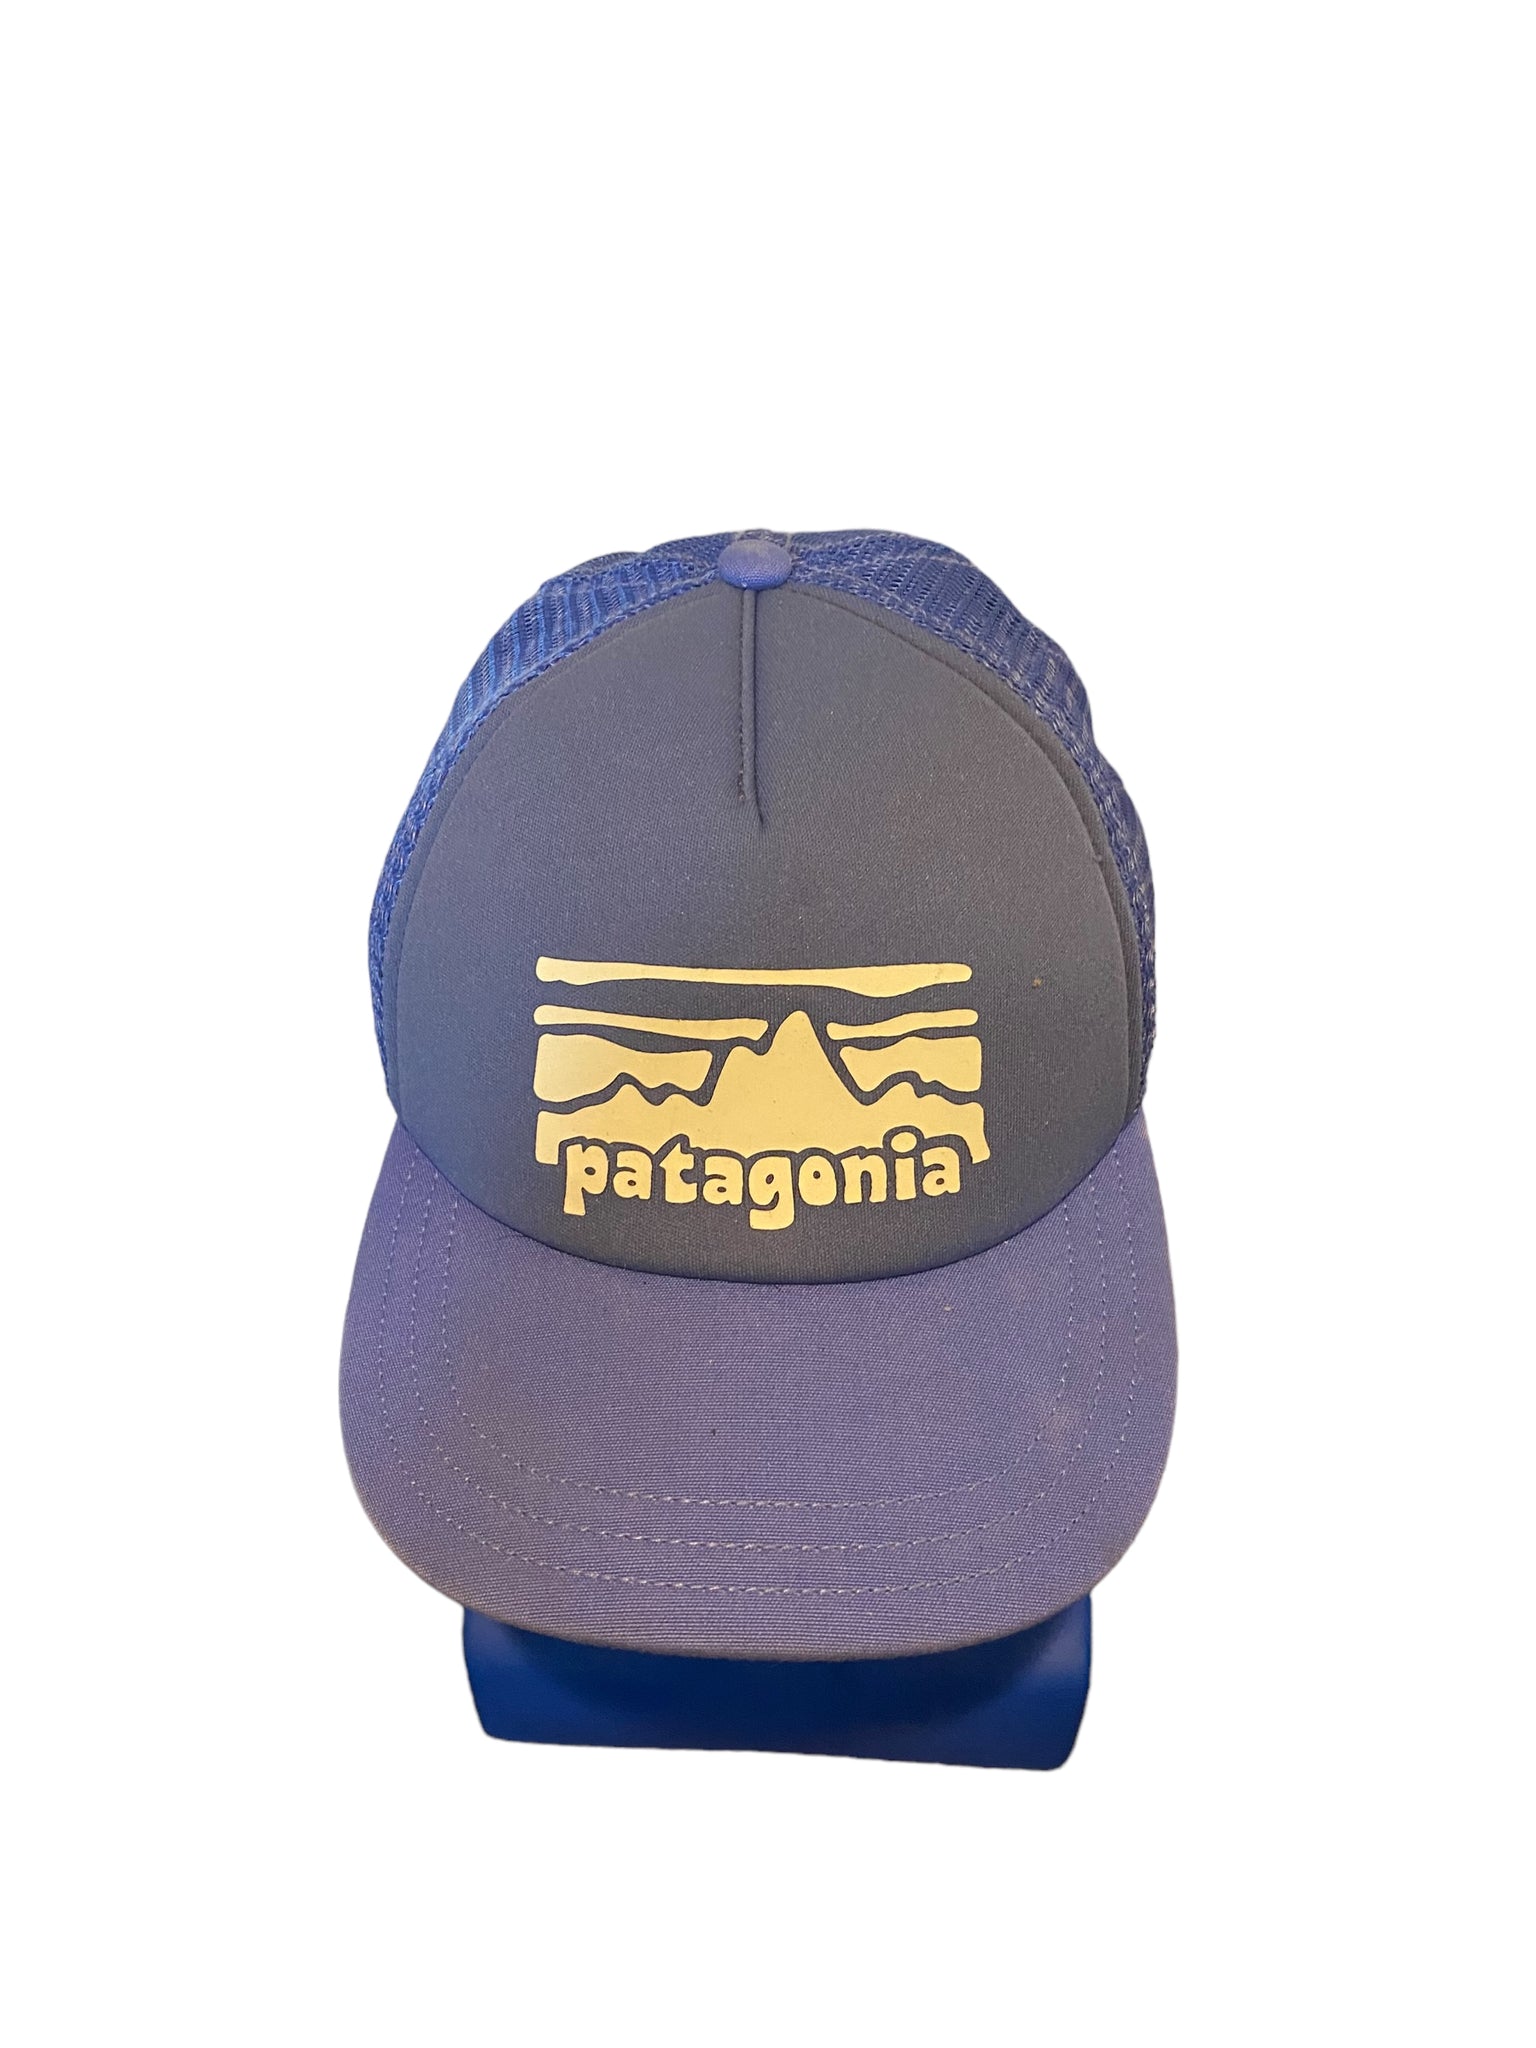 Patagonia Hat Cap Adjustable Blue Embroidered Casual Workwear Mesh Trucker Hat